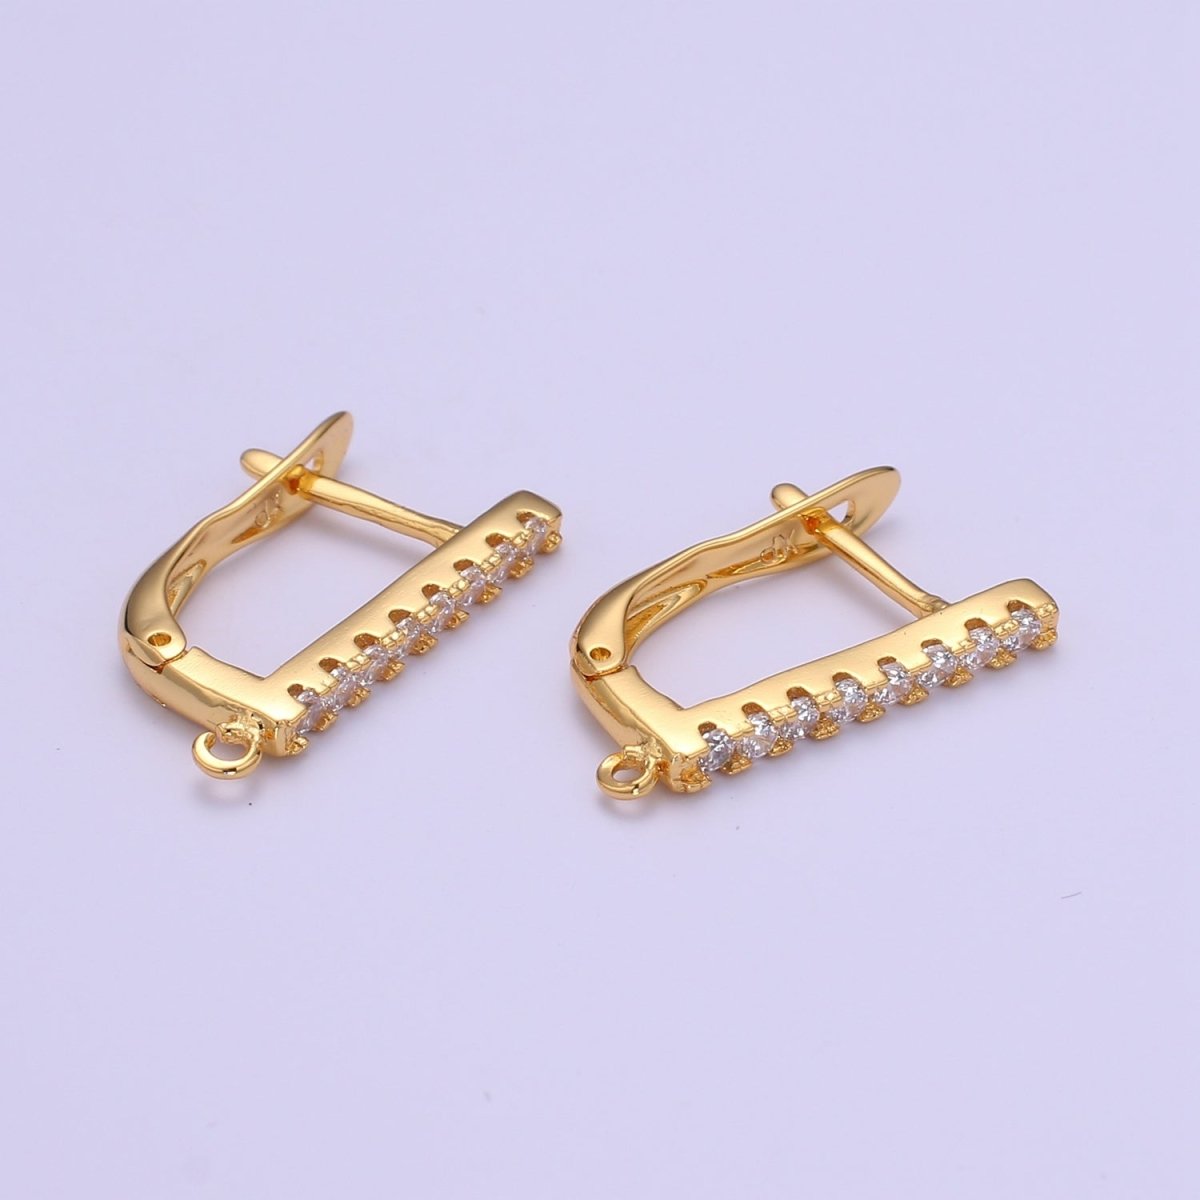 Gold Lever Back Earring Findings Cz Huggie Earring with open link for Earring component supply jewelry making L-224 - DLUXCA